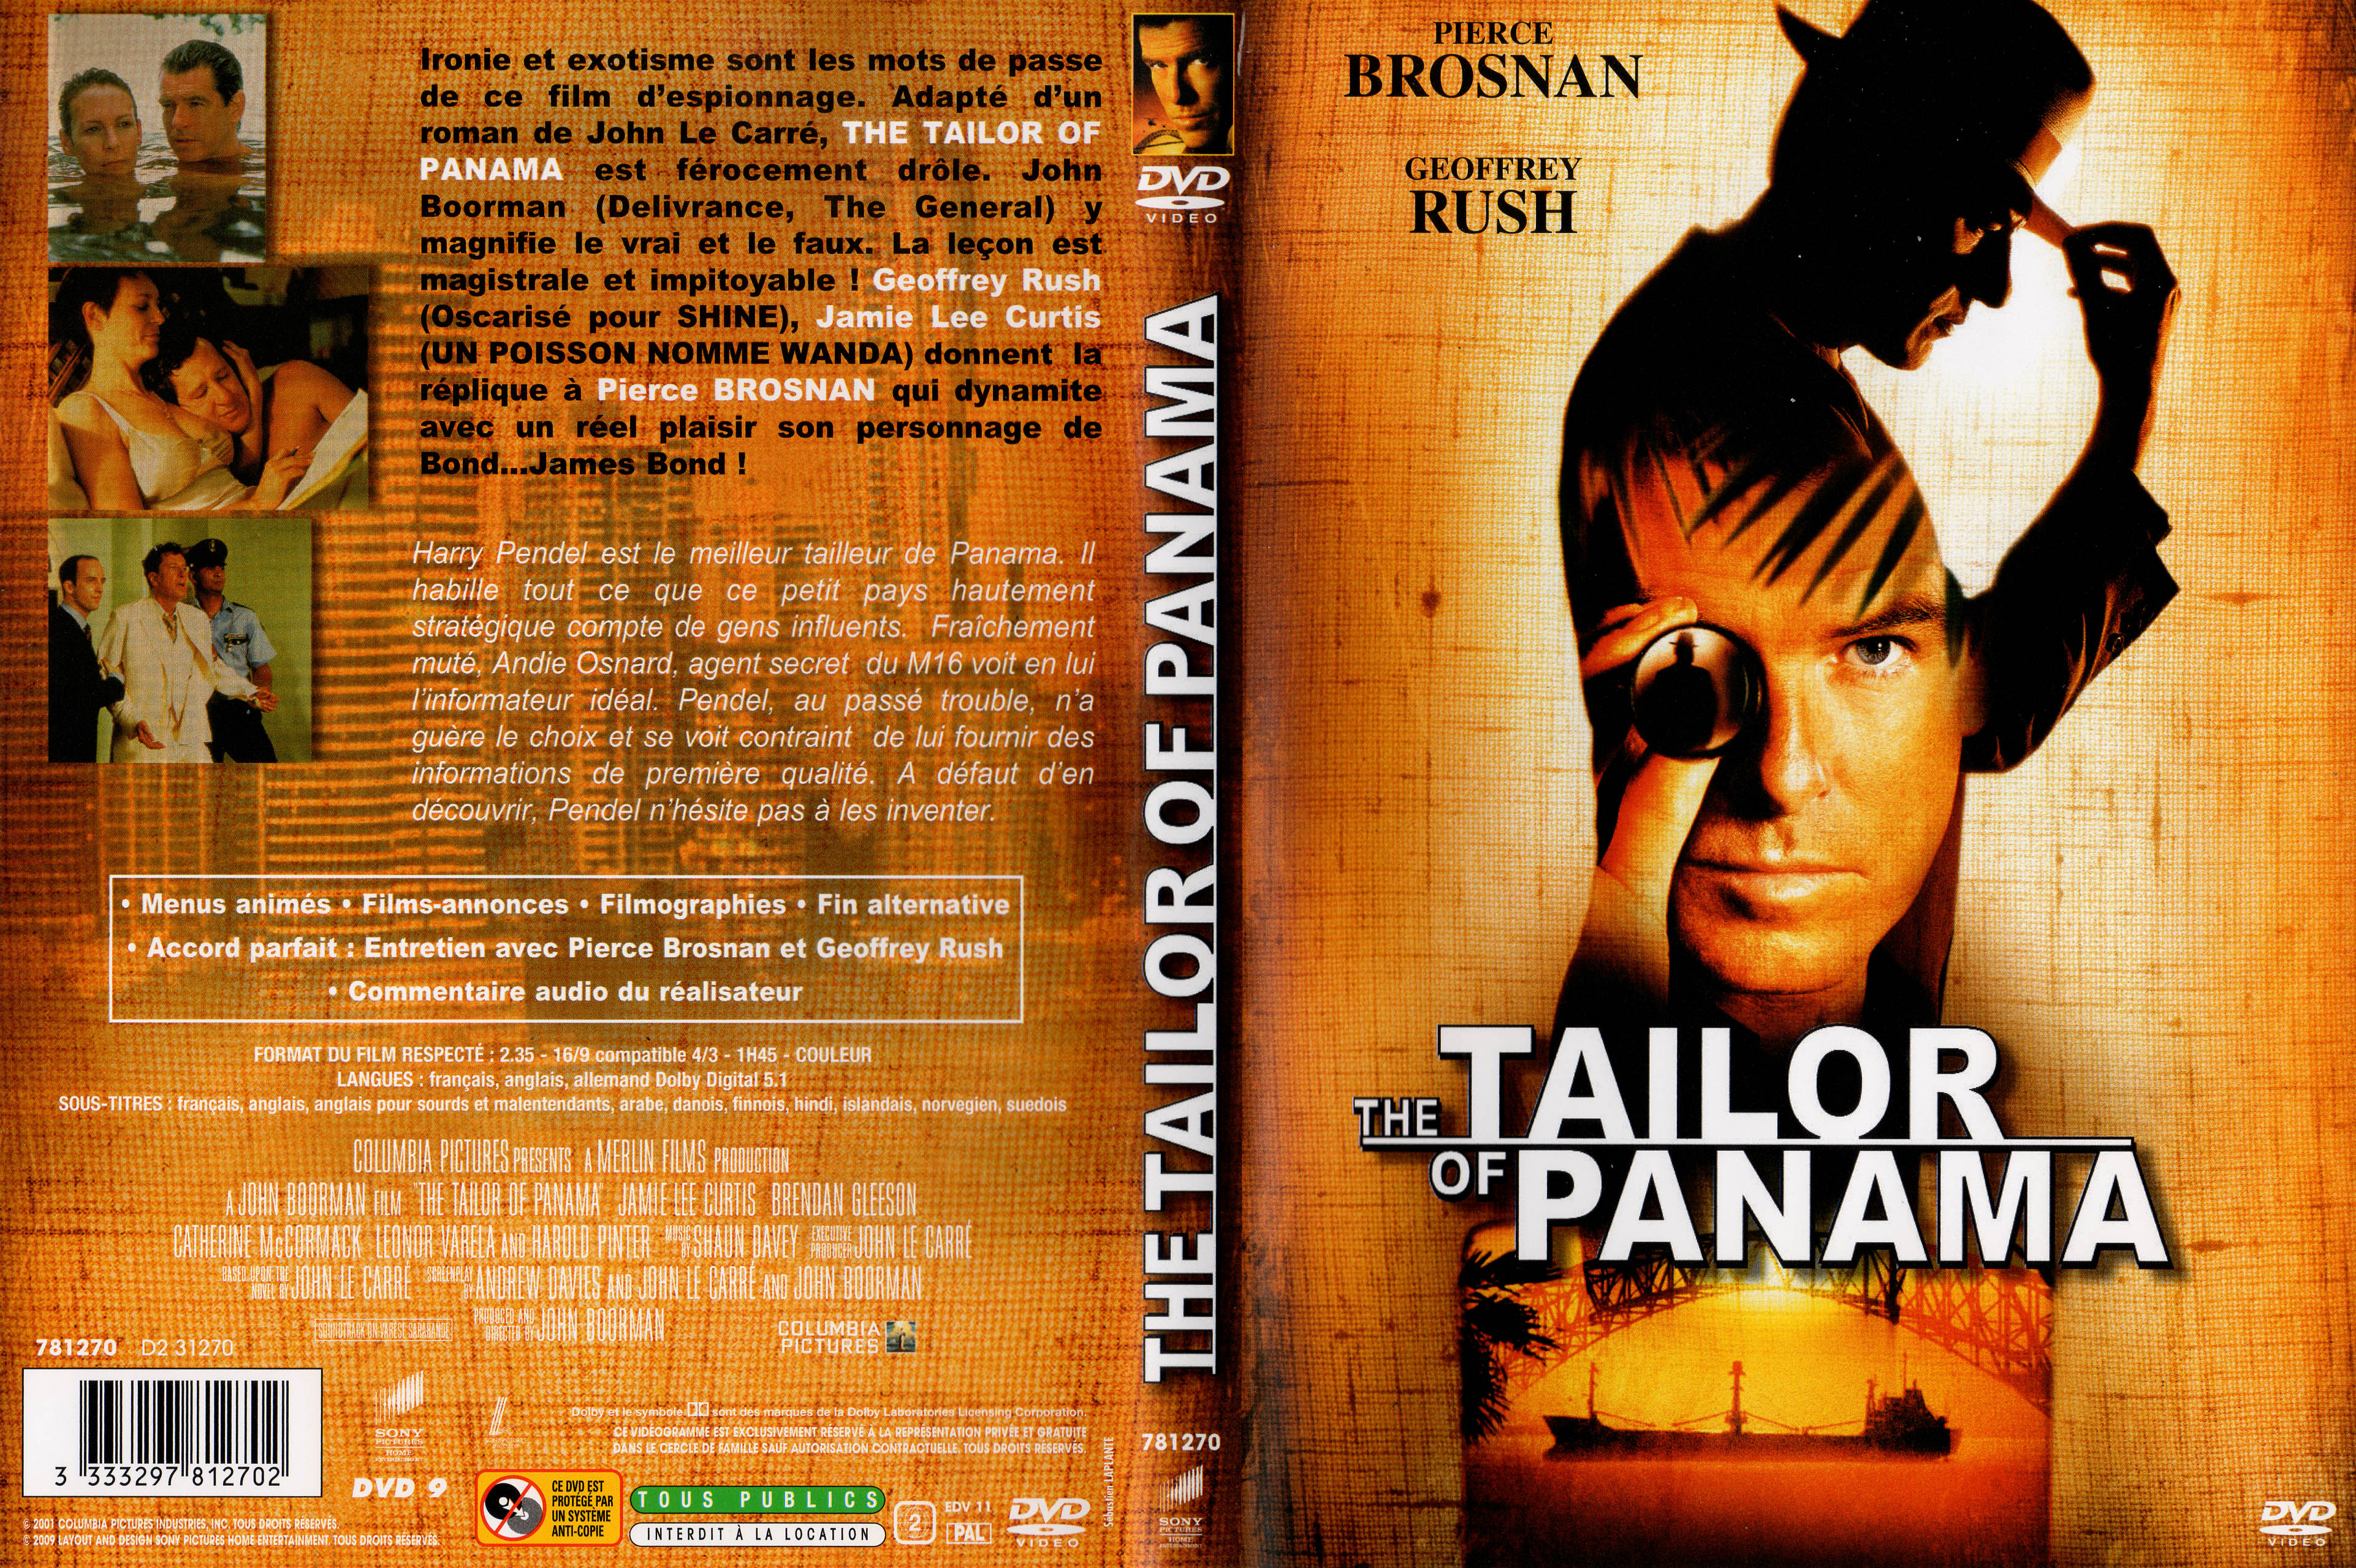 Jaquette DVD The tailor of Panama